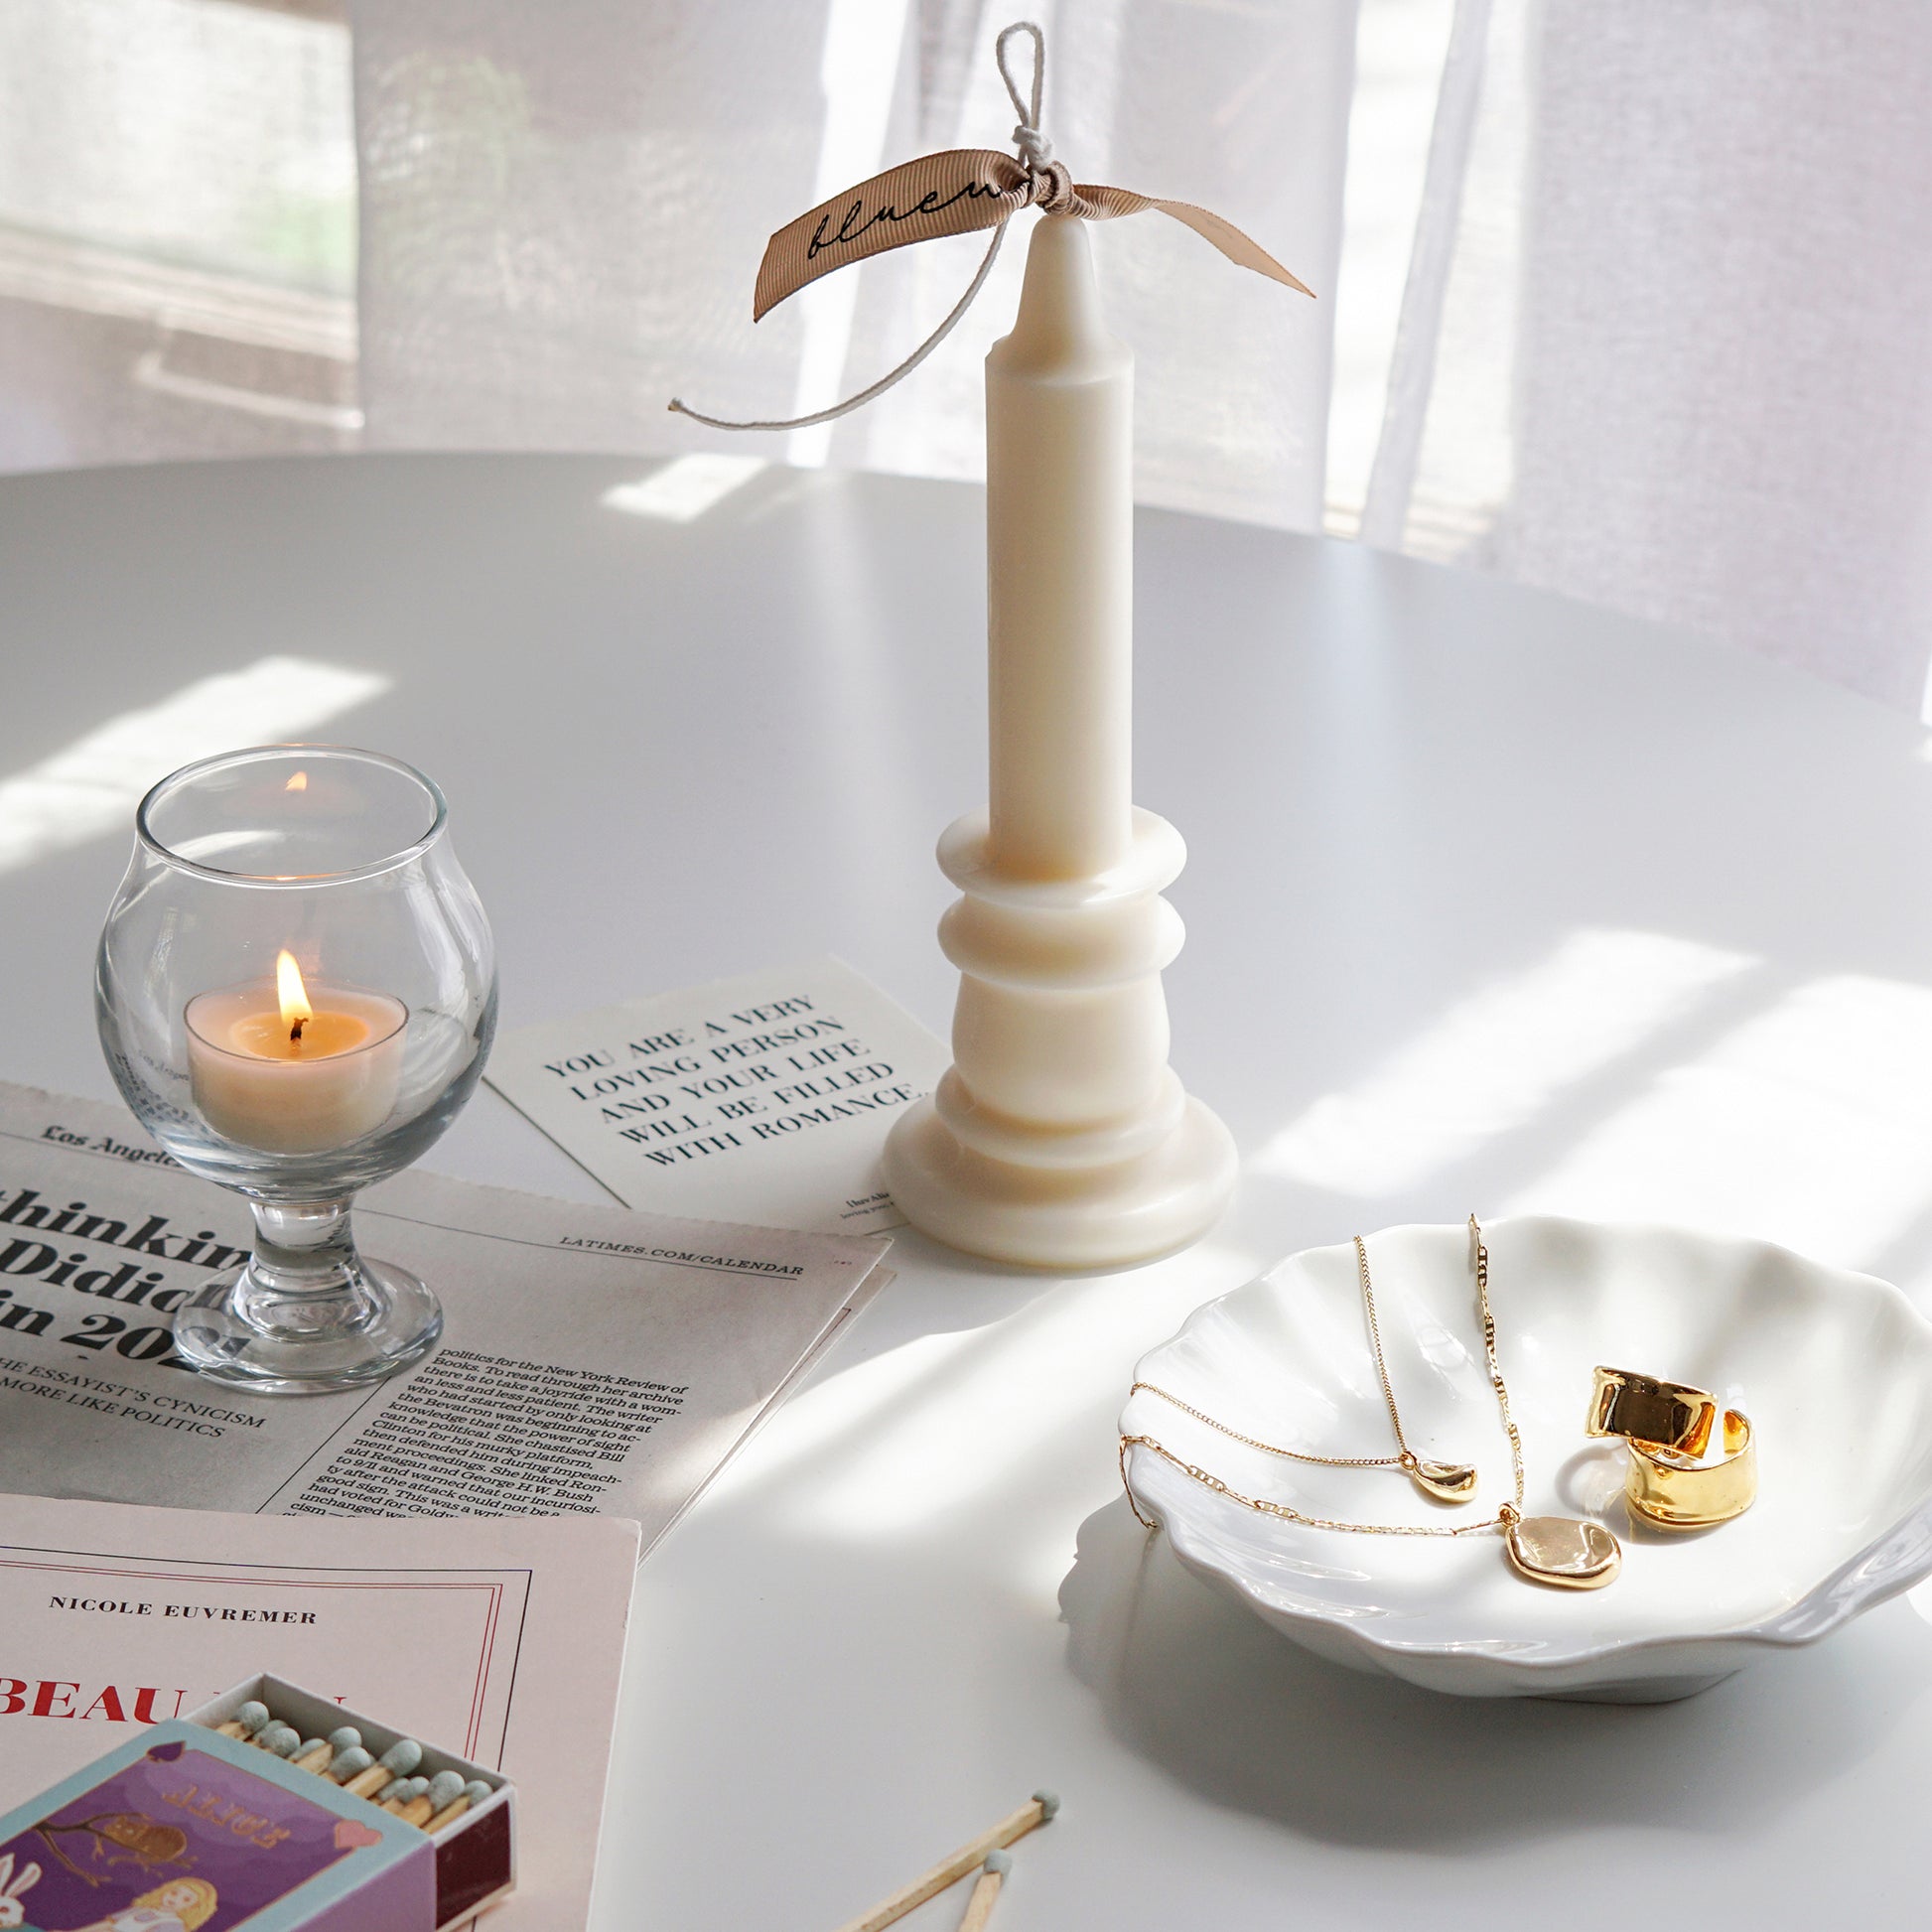 candlestick shape white soy pillar candle with beige bluewine studio ribbon, a lit tealight candle in a mini glass, mint color matches, newspapers, a postcard, French book called Beau Jeu, gold earrings and necklace on white ceramic shell tray on white round table